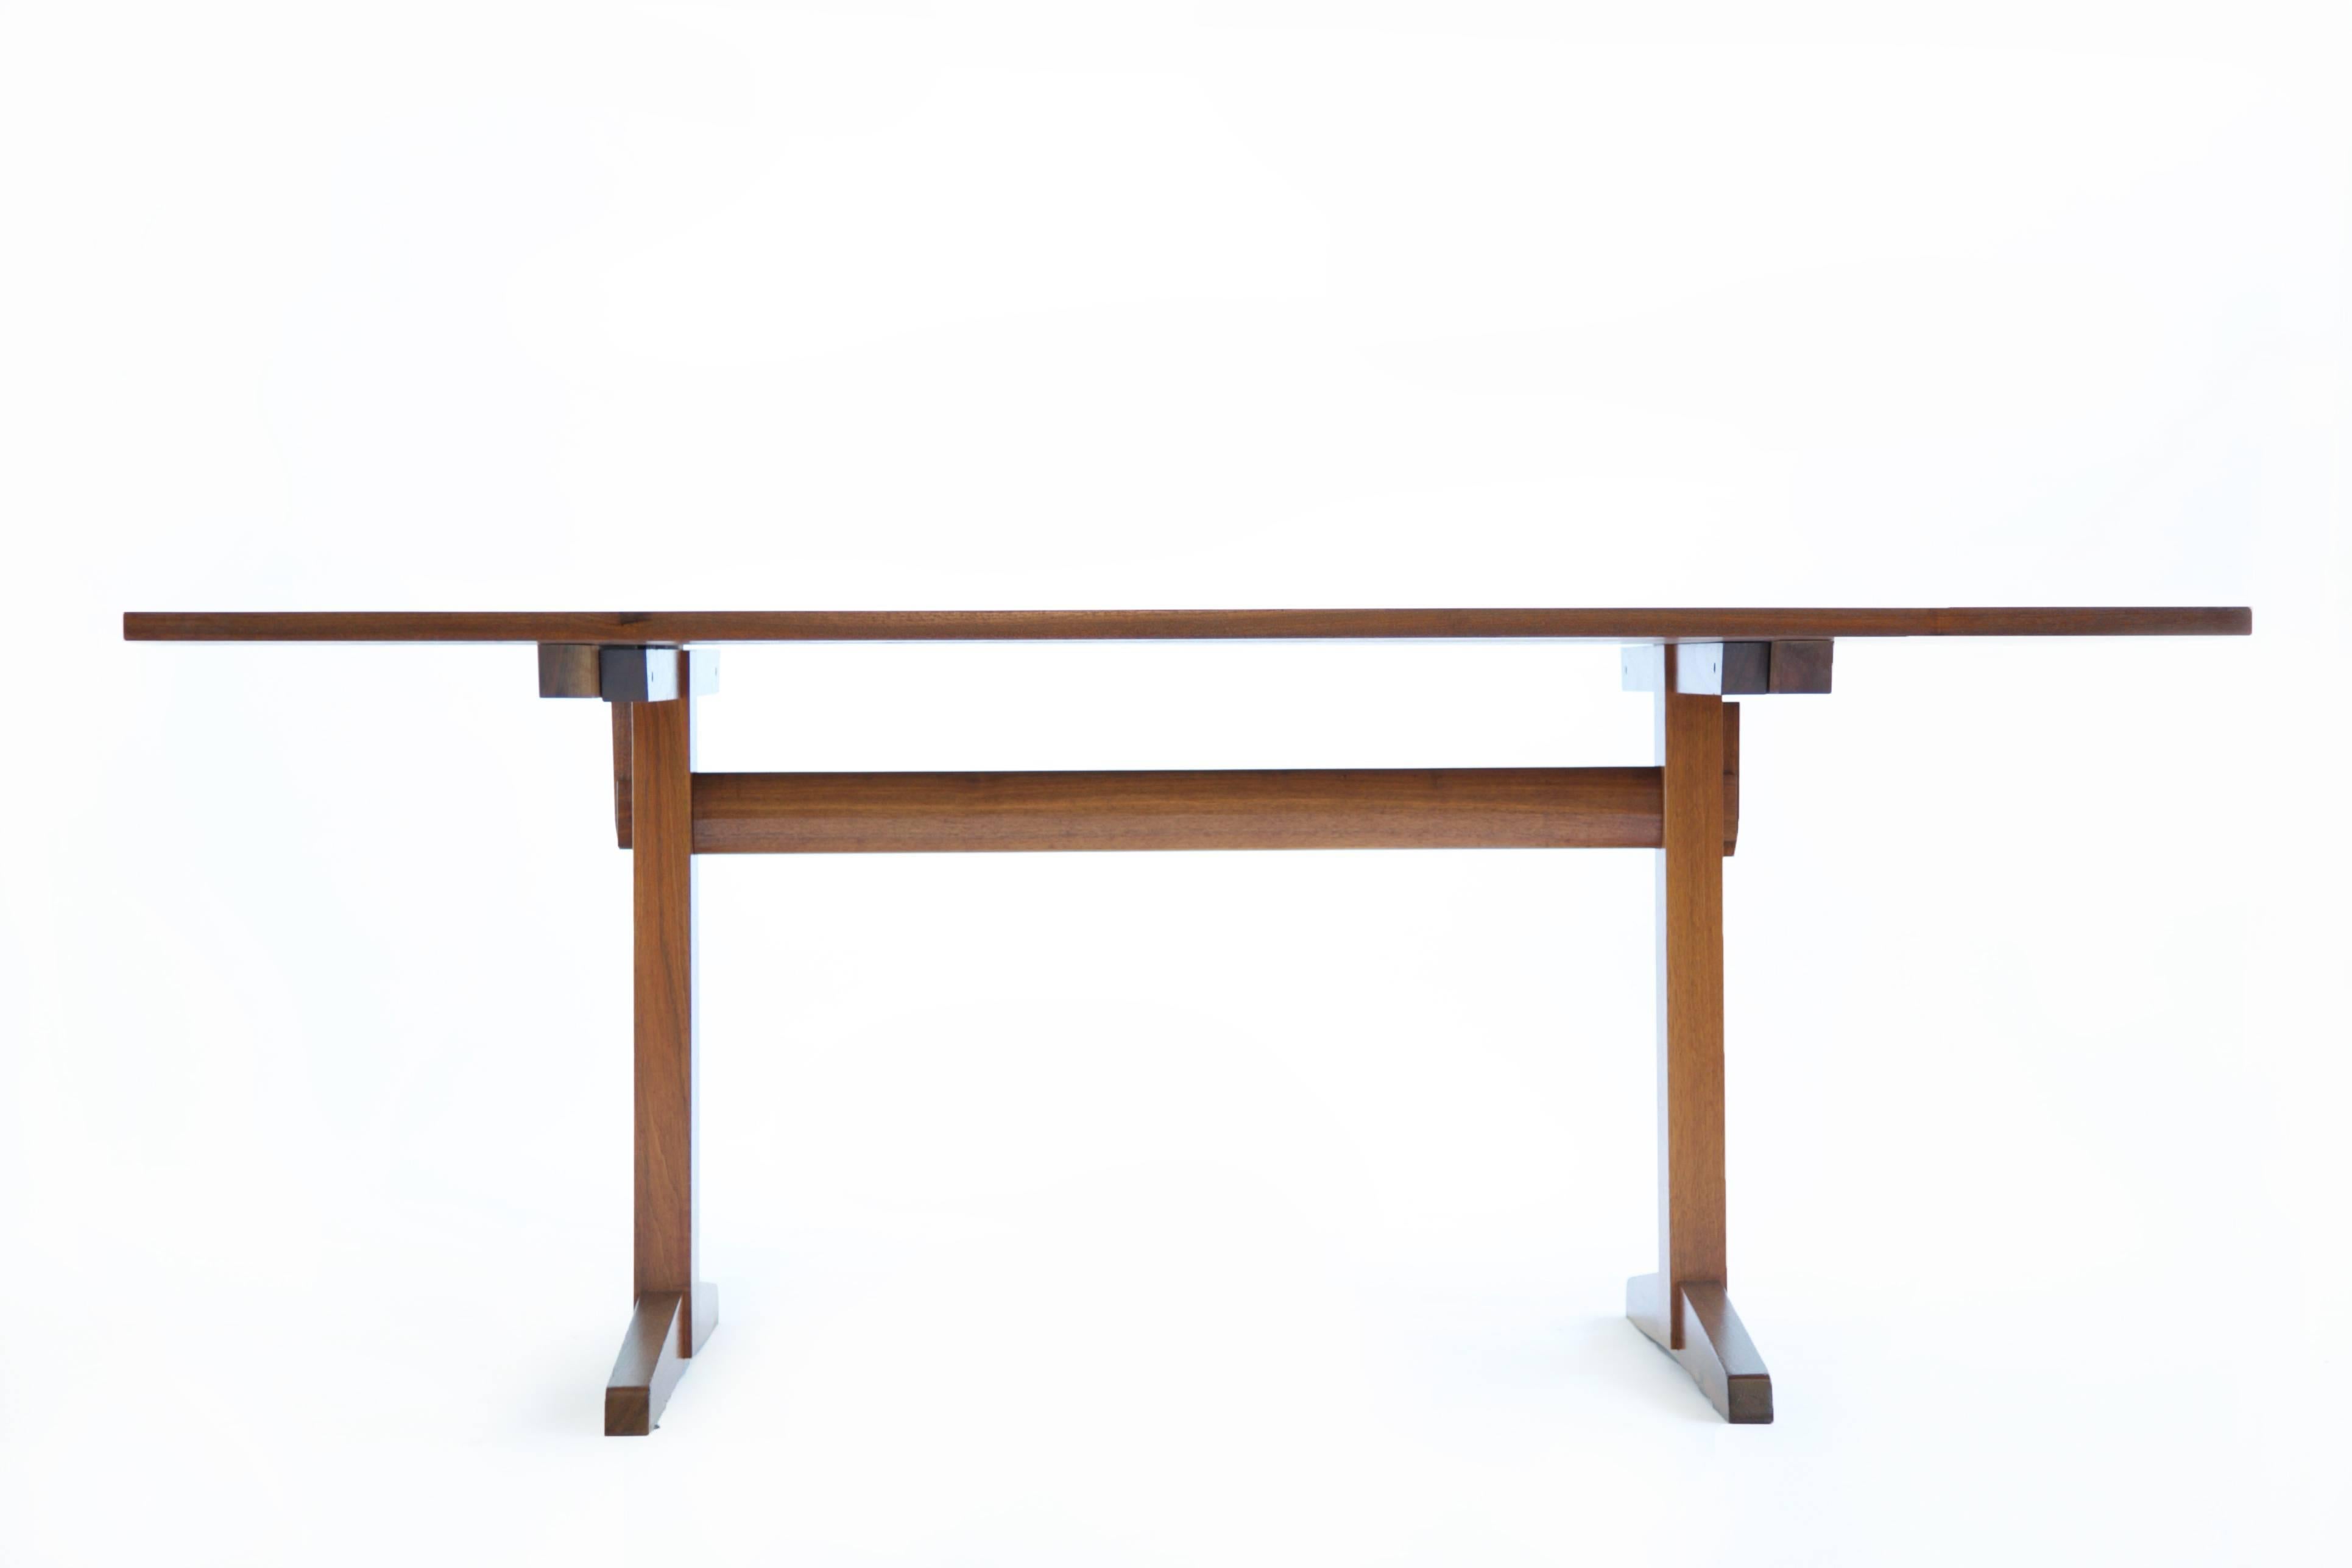 Trestle dining table: Which consists of bookmatched solid boards, with three rosewood butterfly joints, The top is not screwed in like most, it's fits precisely to the base and is secured with pegs (shown in images) The horizontal rail that connects